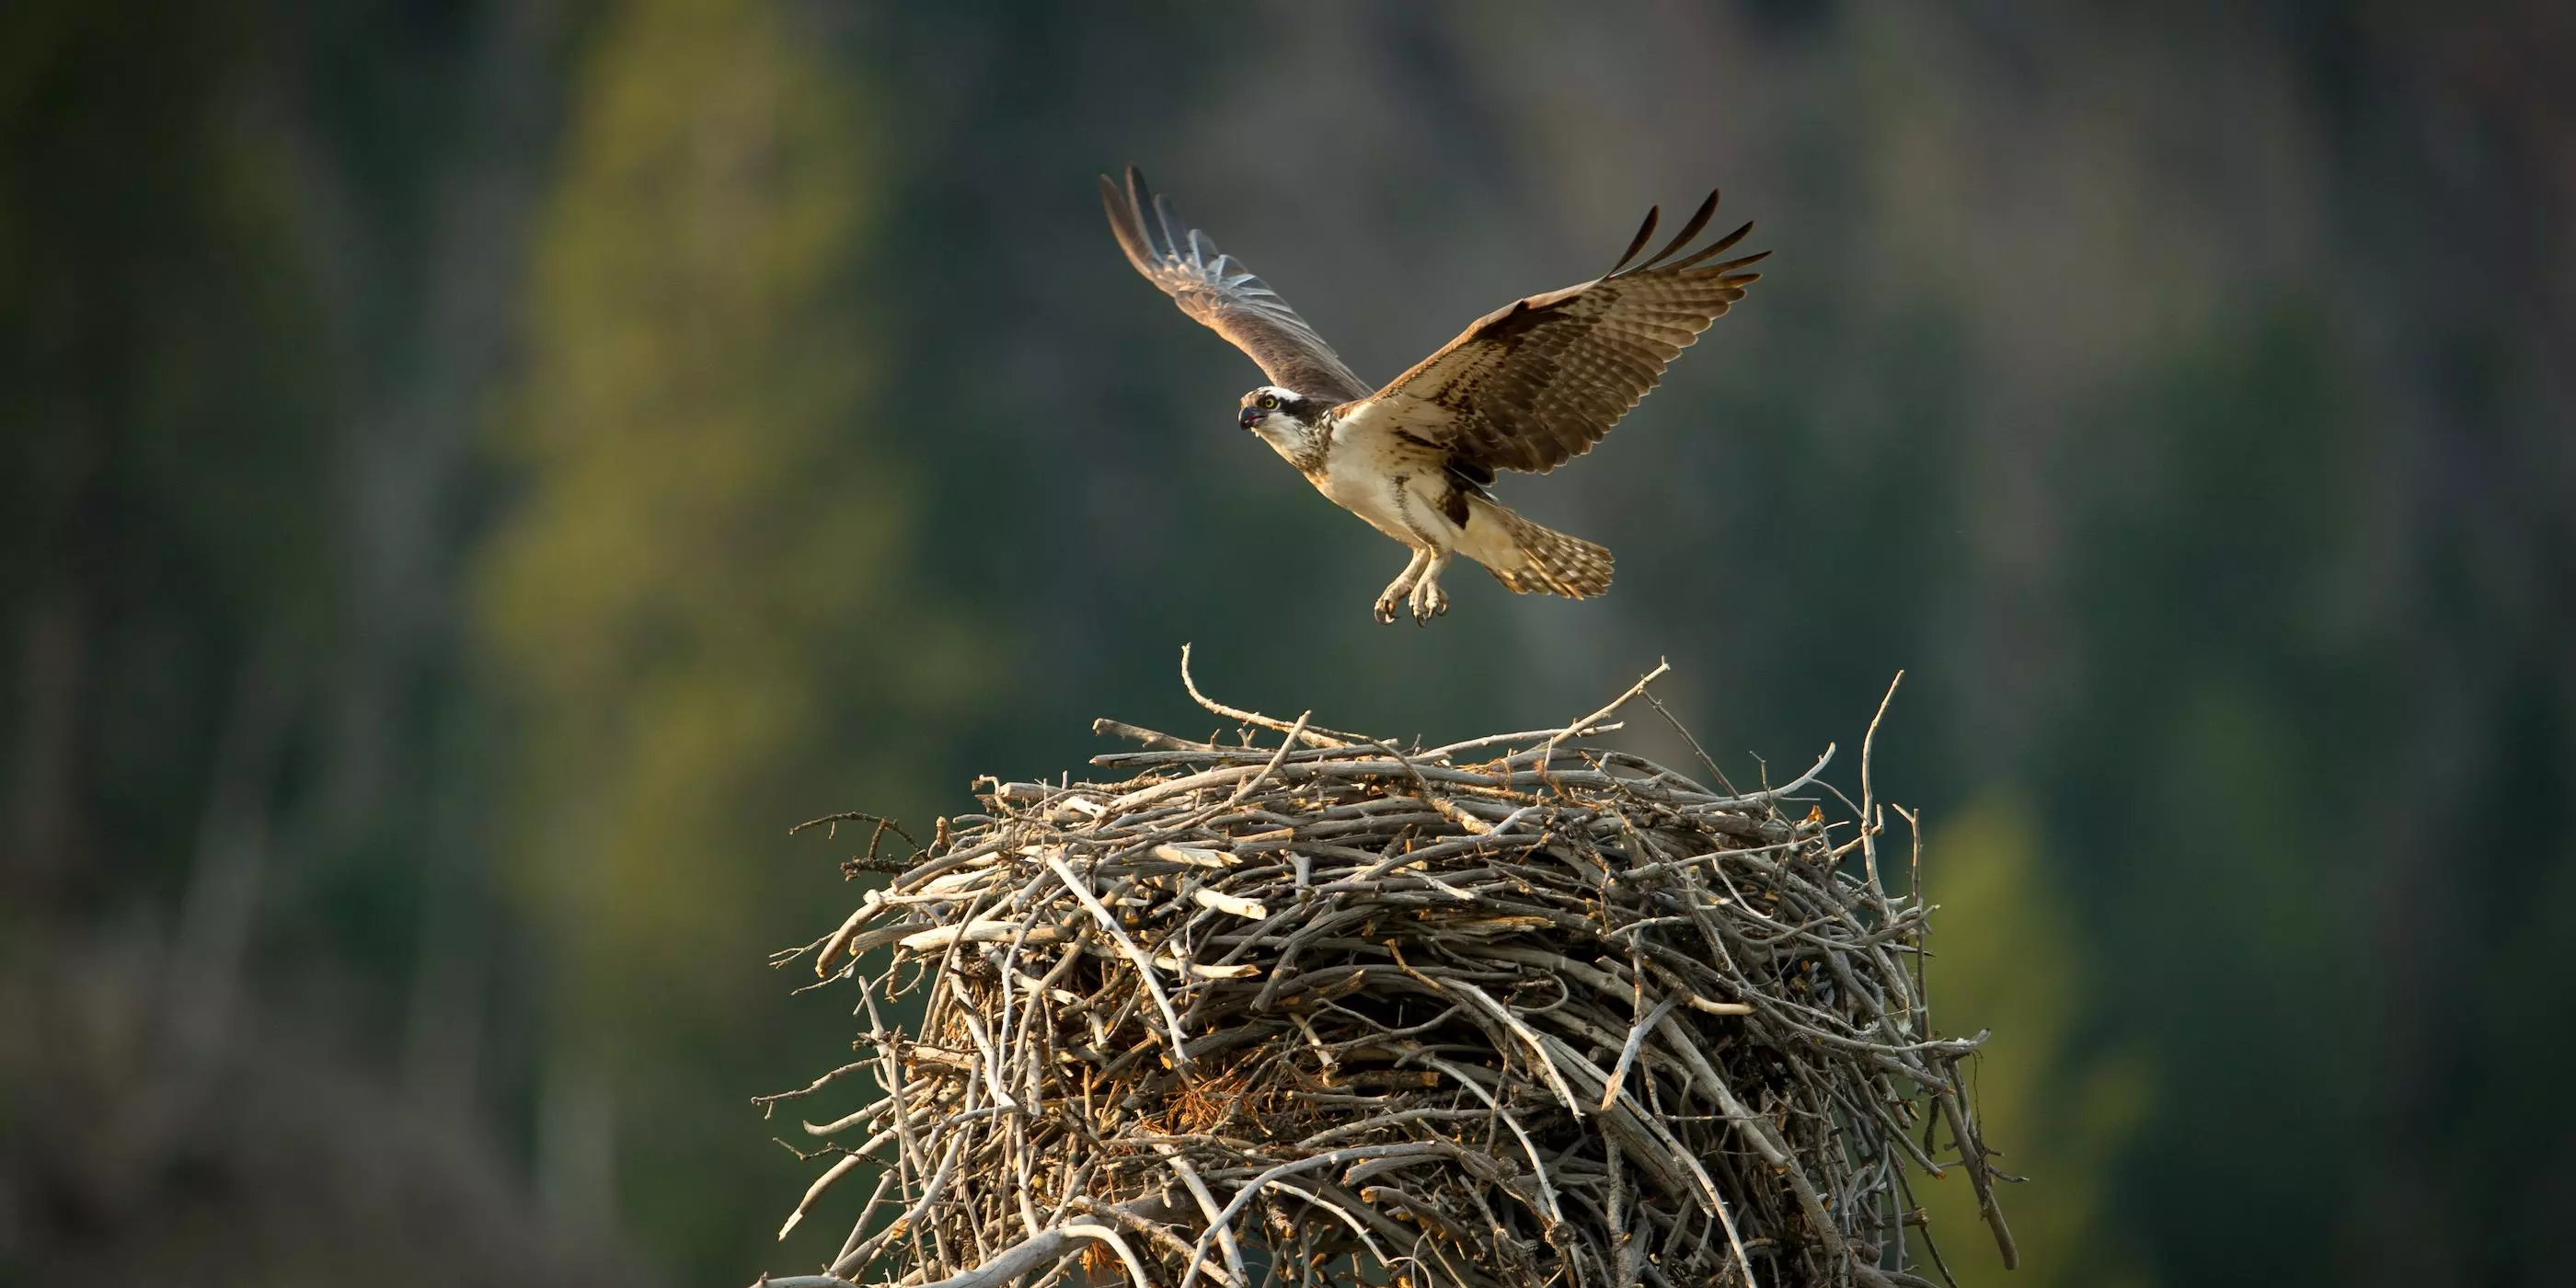 An osprey in flight just above its nest